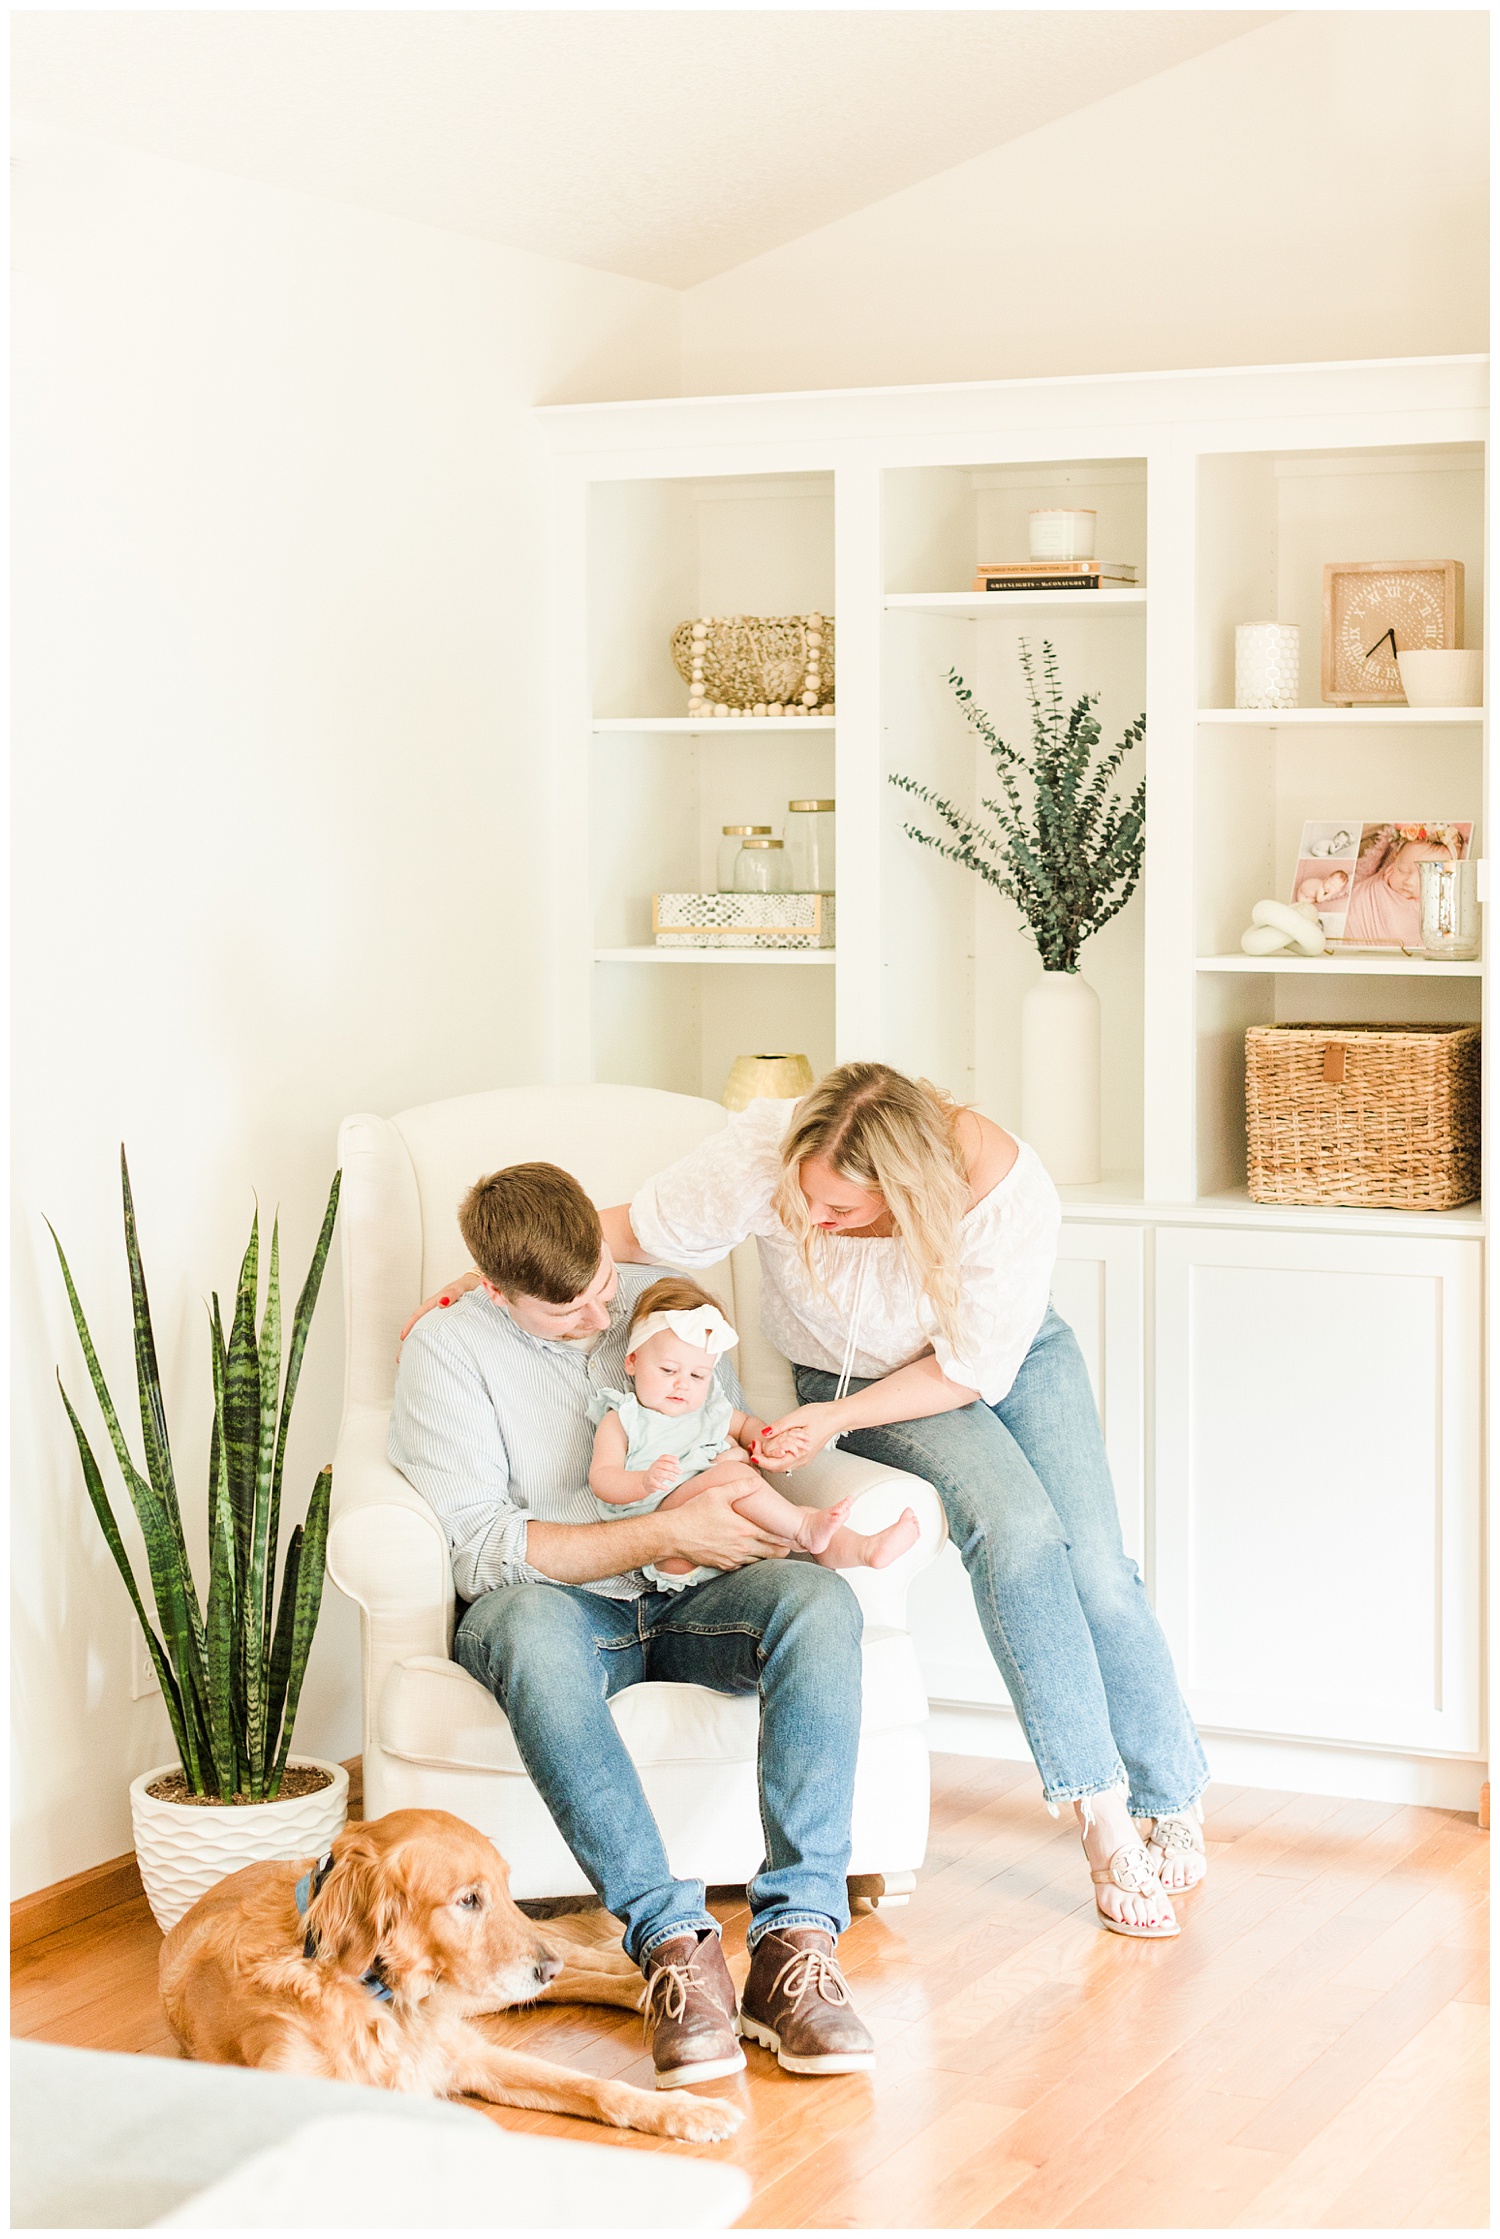 The Bollig family snuggles together in their living room | CB Studio